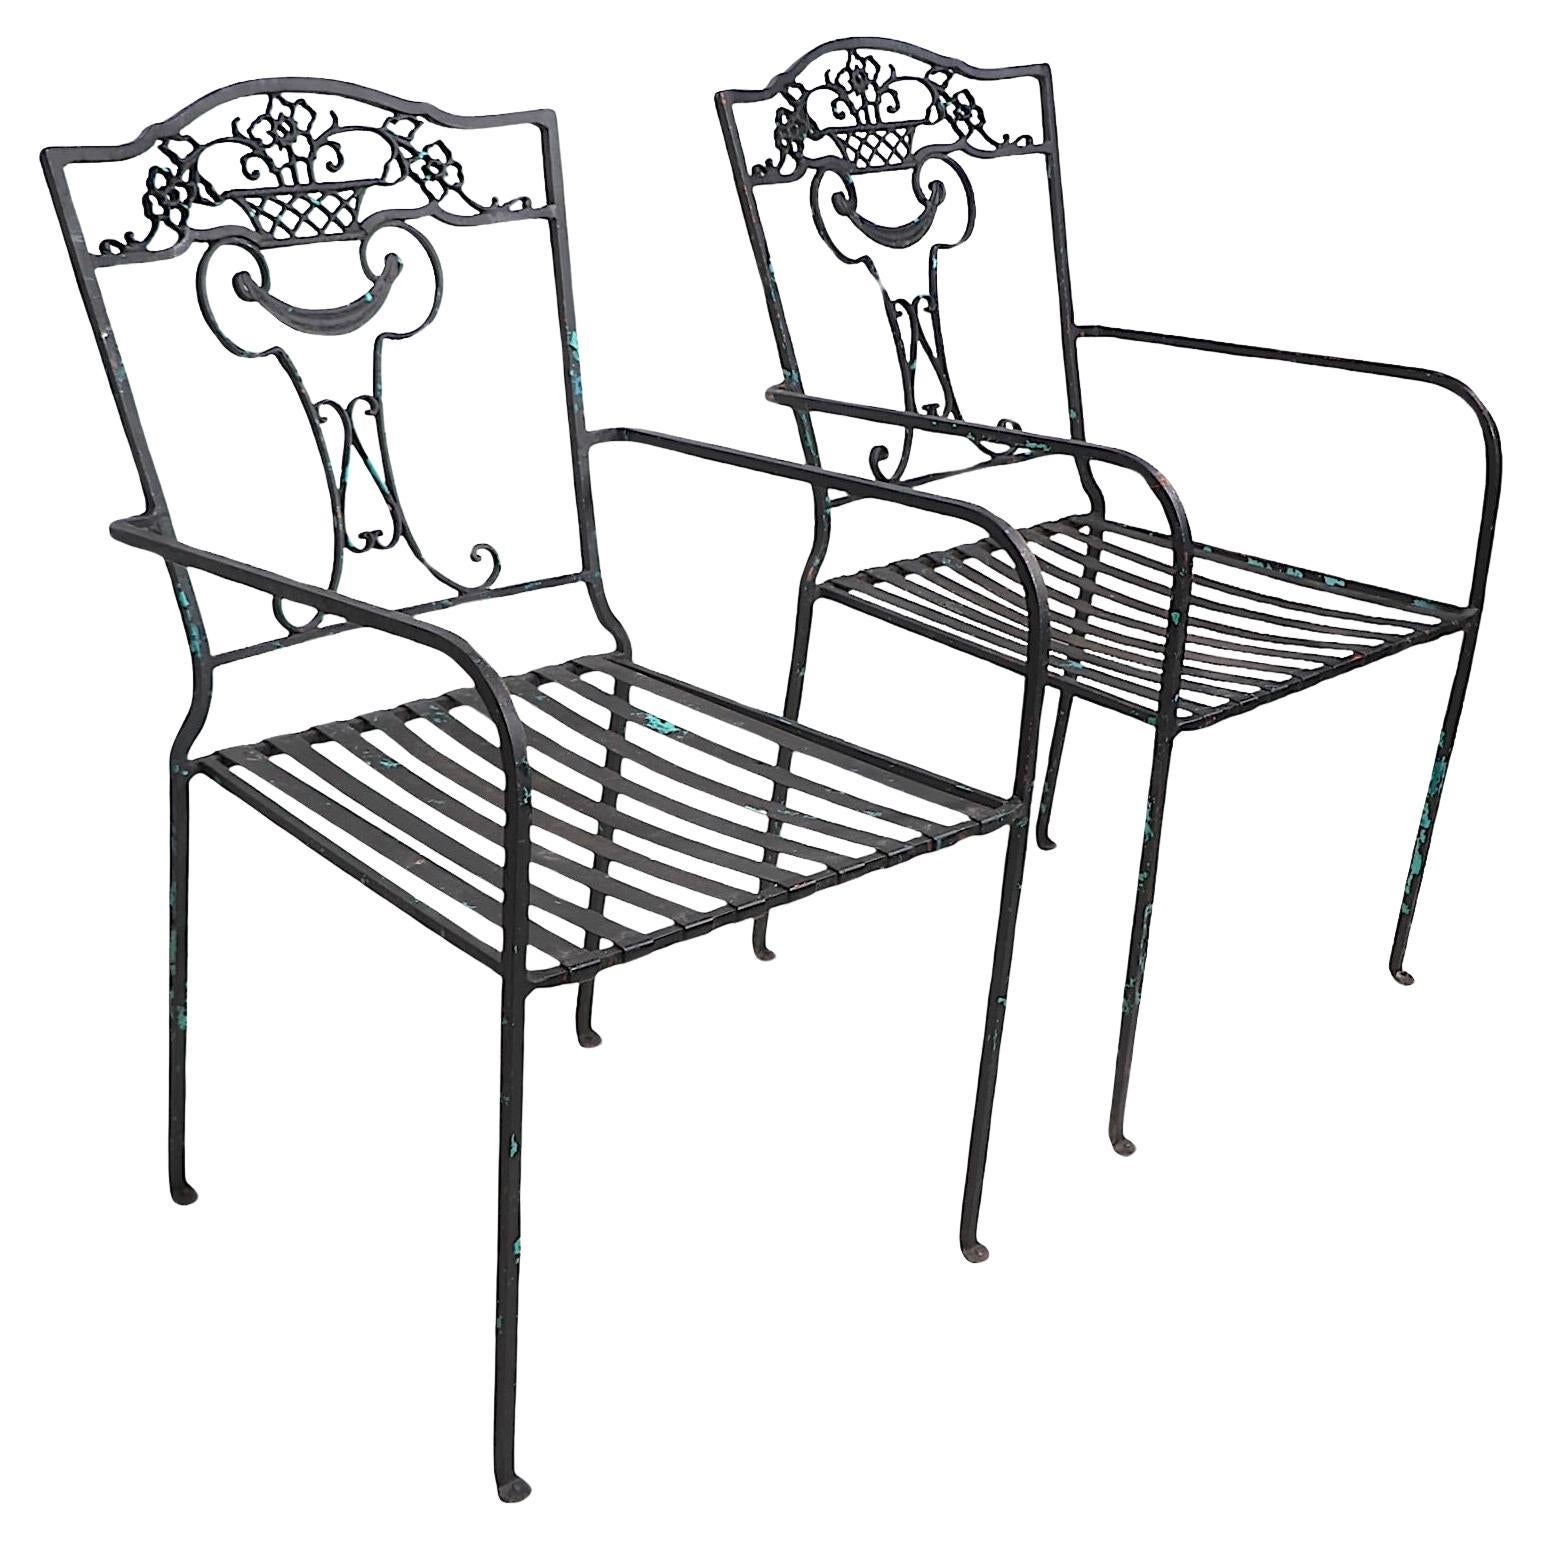 Pr.  Vintage Wrought Iron Dining Height Arm Chairs c. 1920/60's For Sale